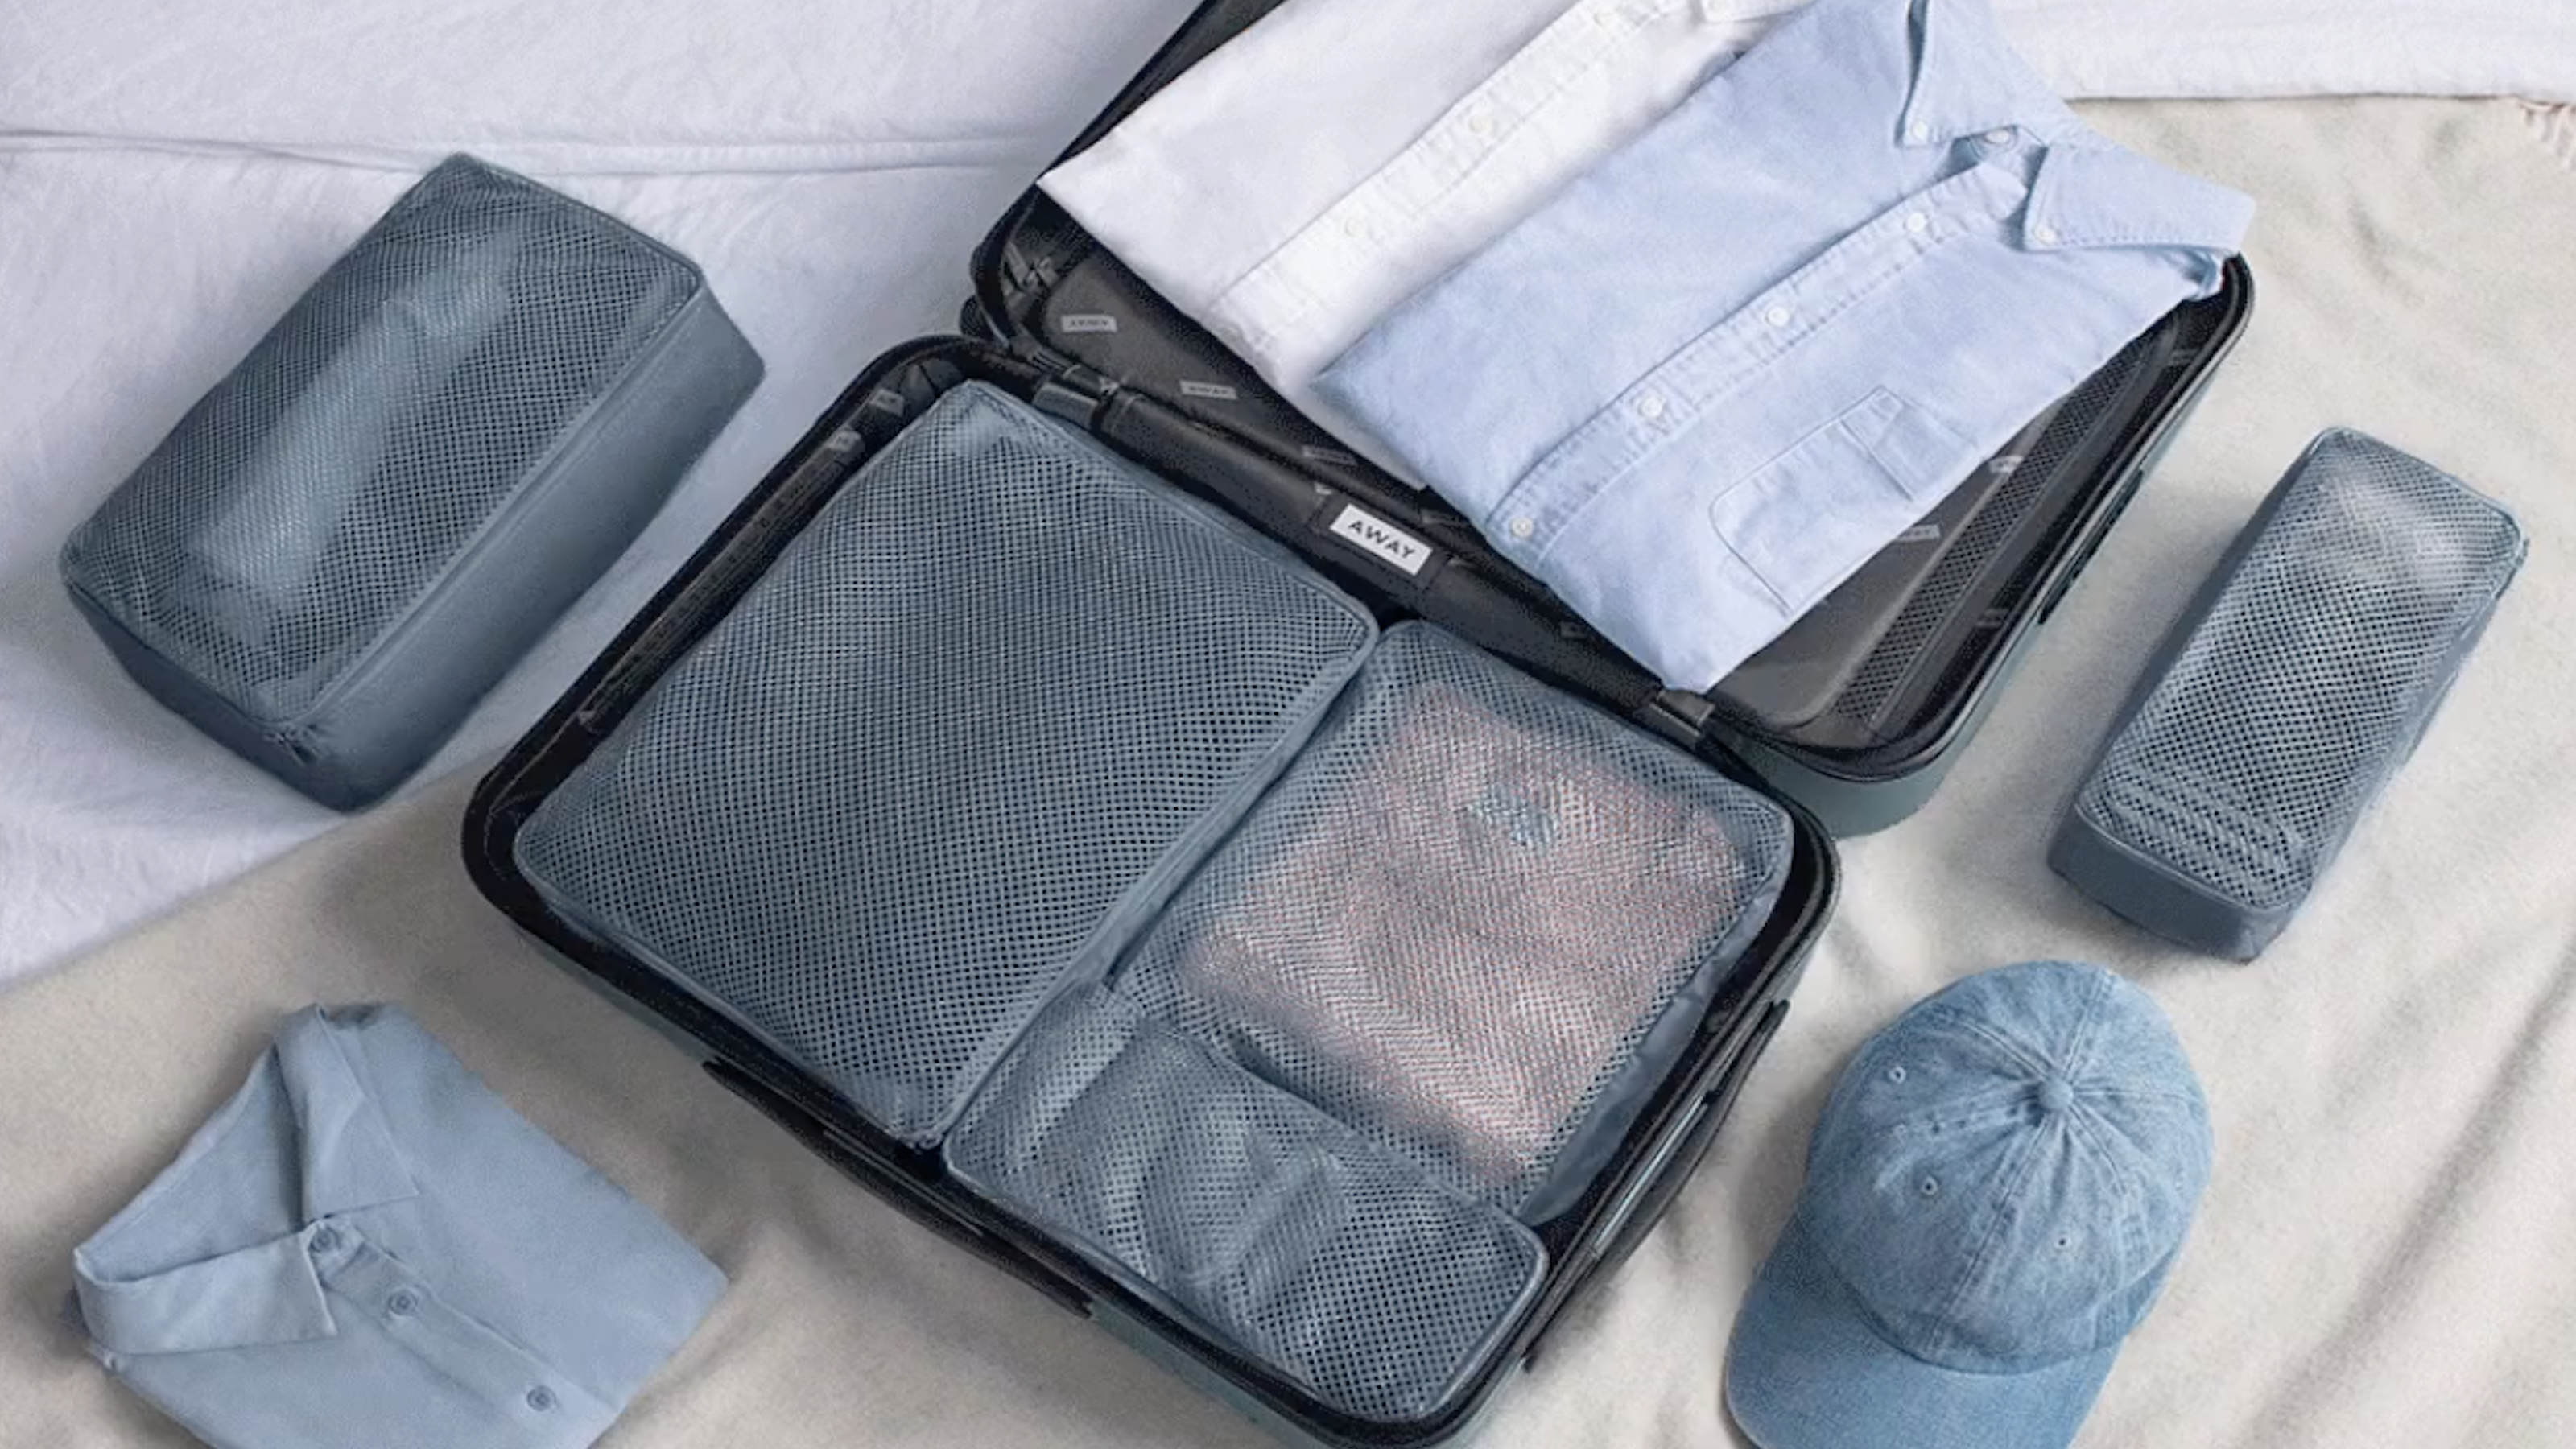 9 Best Packing Cubes for Travel 2023 - Top-Rated Packing Cubes